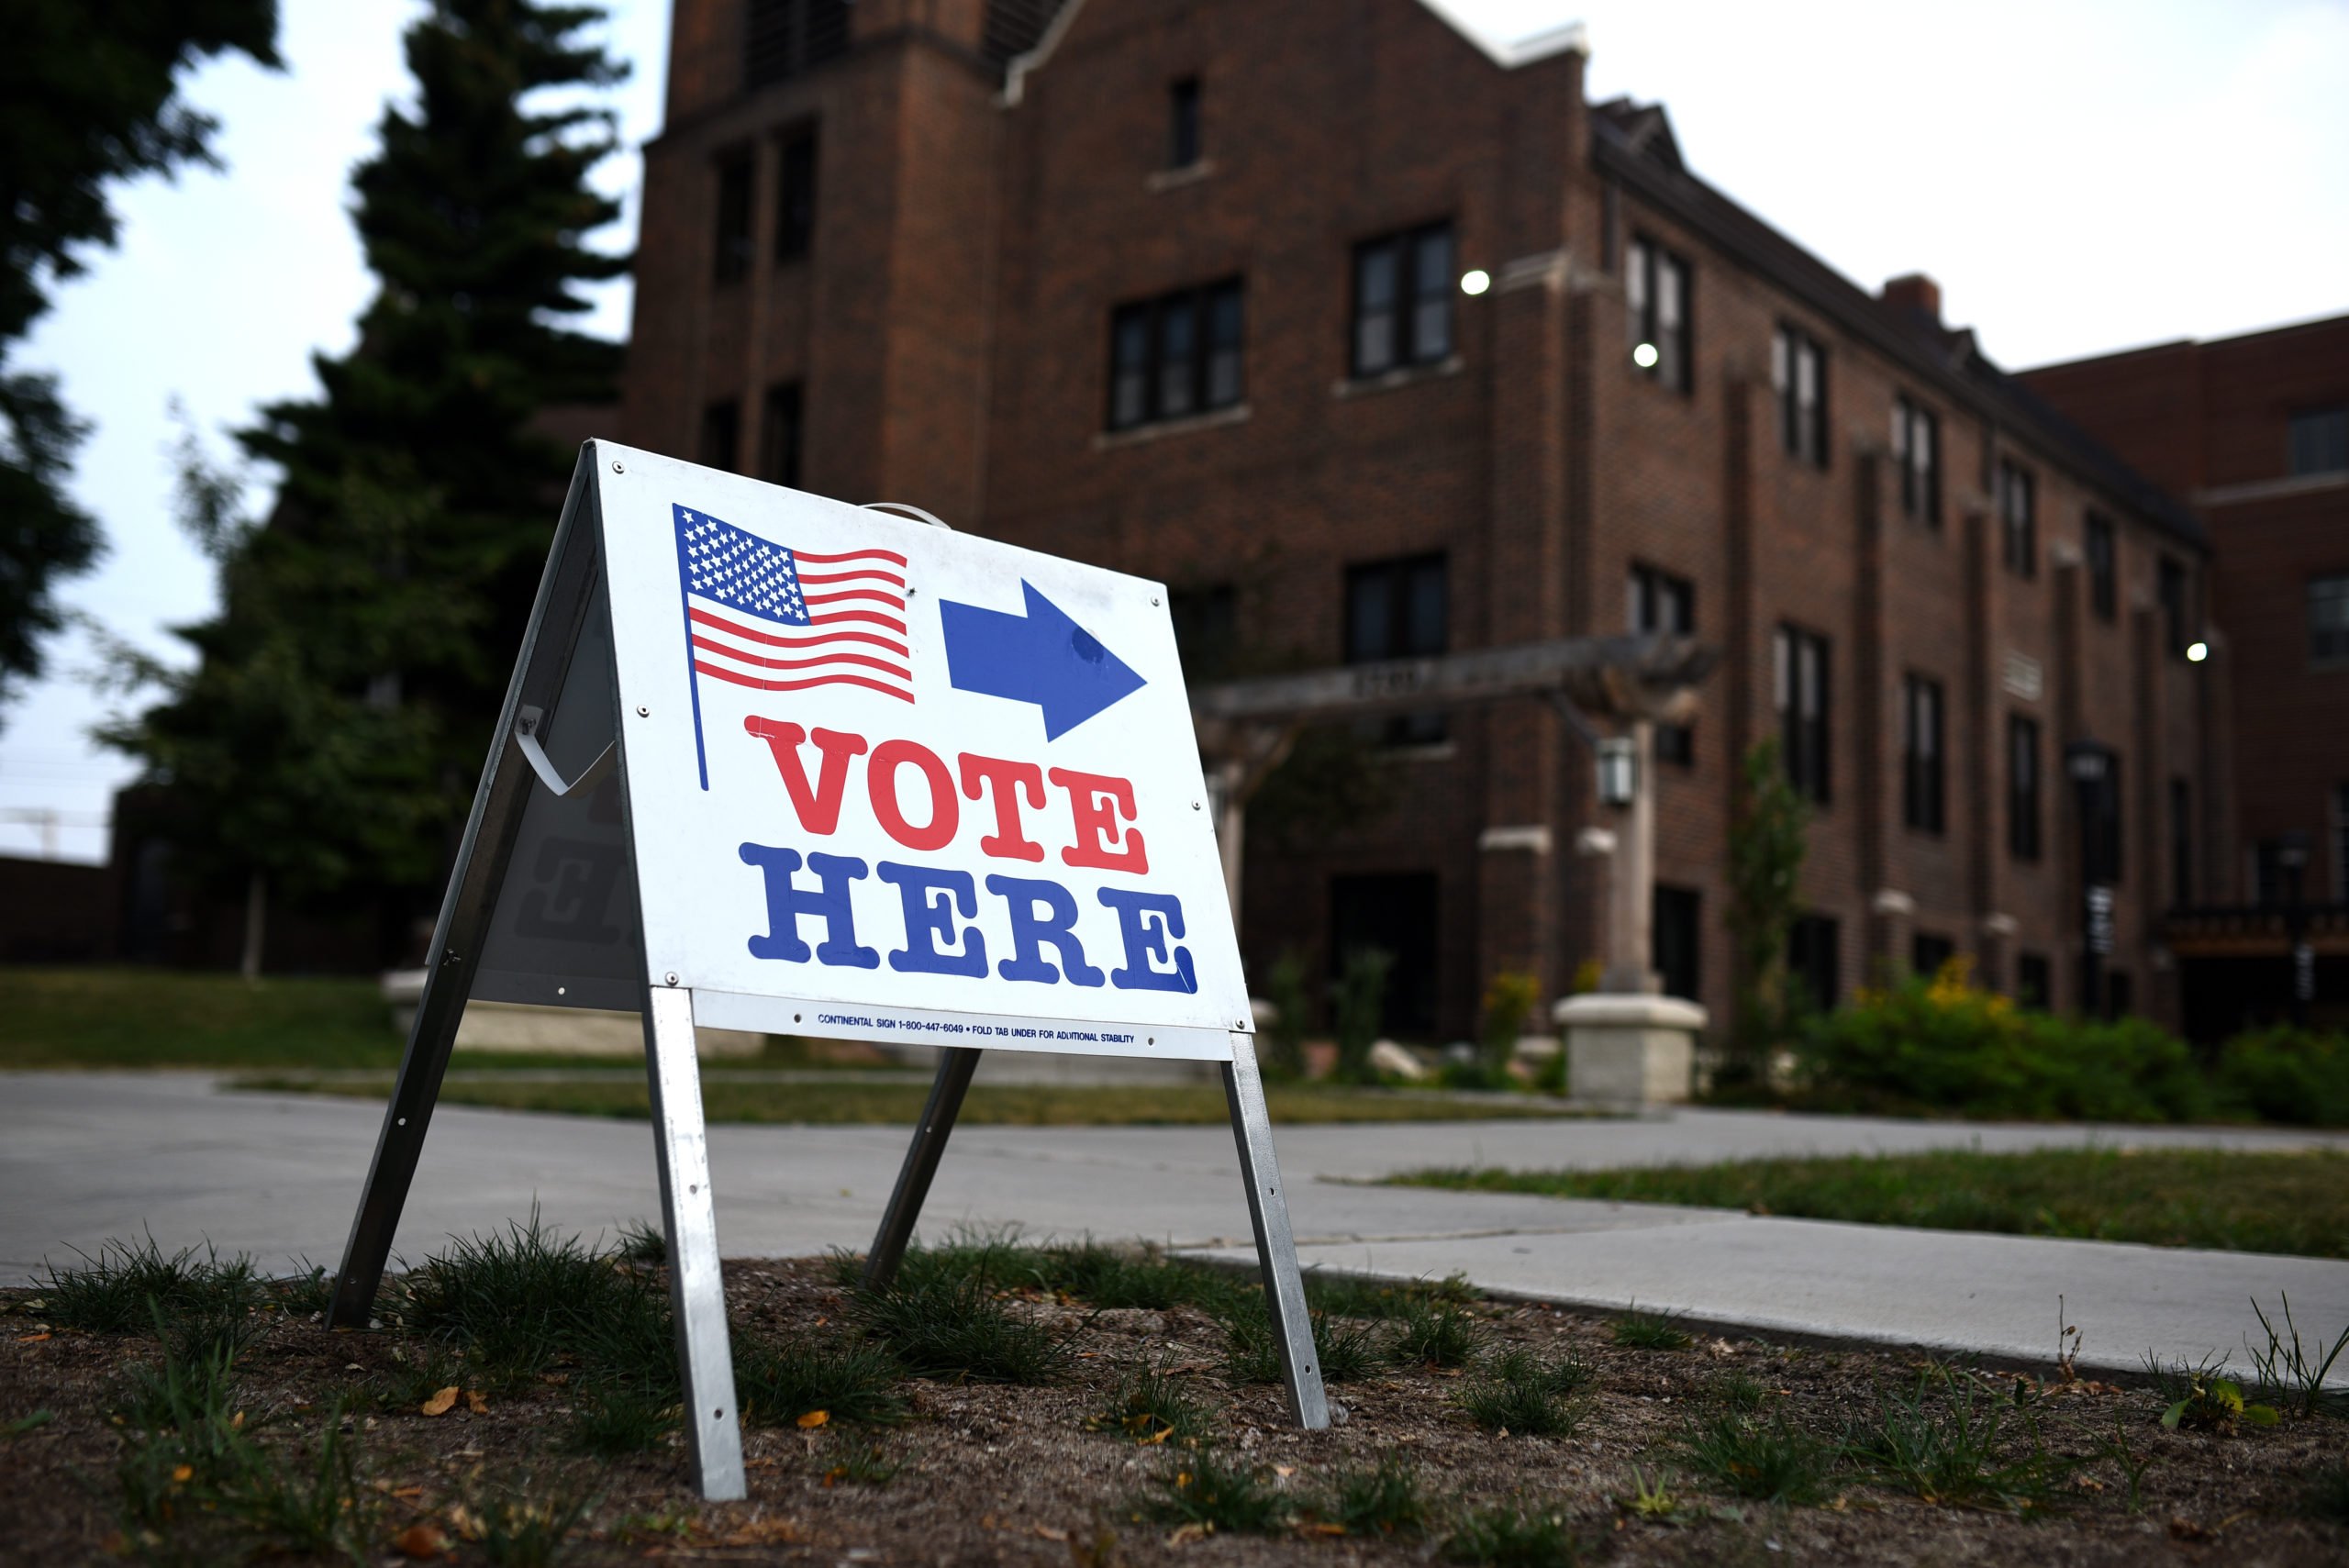 MINNEAPOLIS, MN - AUGUST 14: A sign reading "Vote Here" points toward a polling place for the 2018 Minnesota primary election at Holy Trinity Lutheran Church on August 14, 2018 in Minneapolis, Minnesota. (Photo by Stephen Maturen/Getty Images)